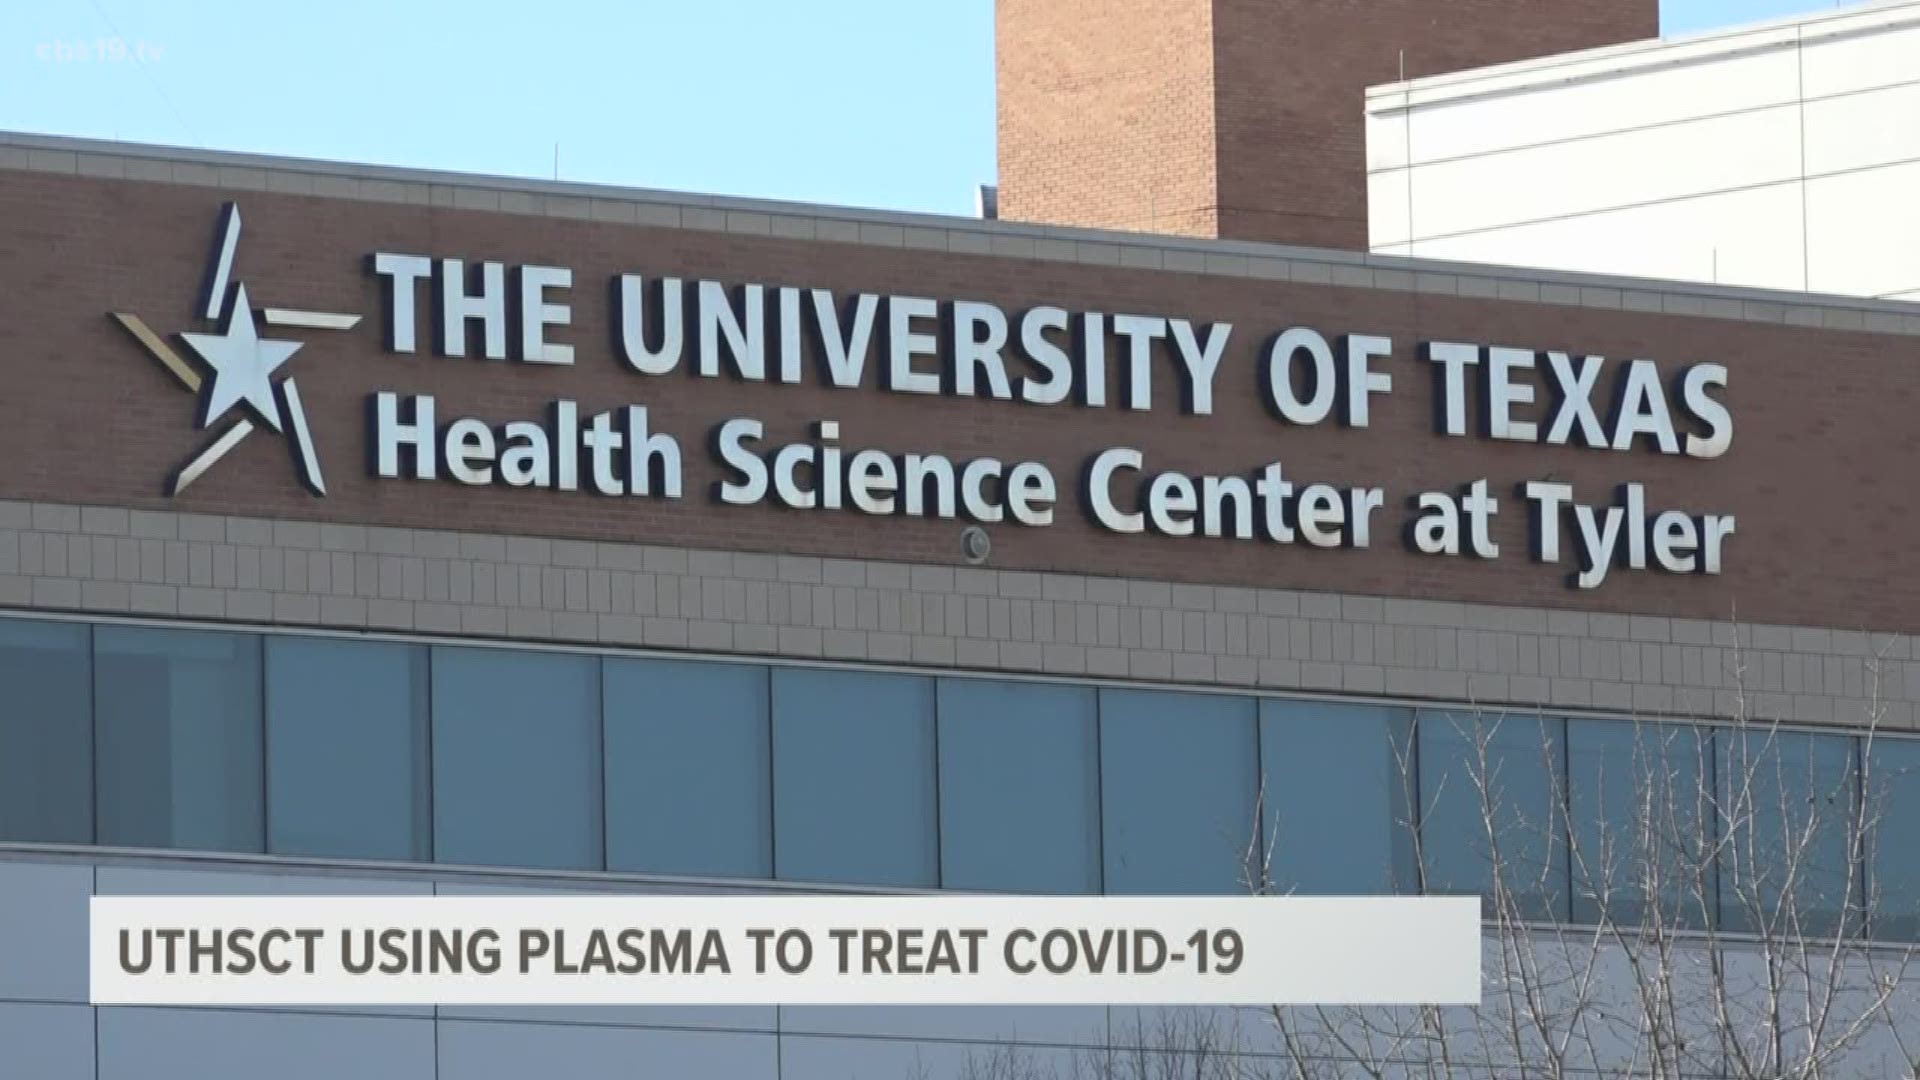 Doctors in East Texas have begun clinically testing treatments using blood from patients who have already recovered from COVID-19.